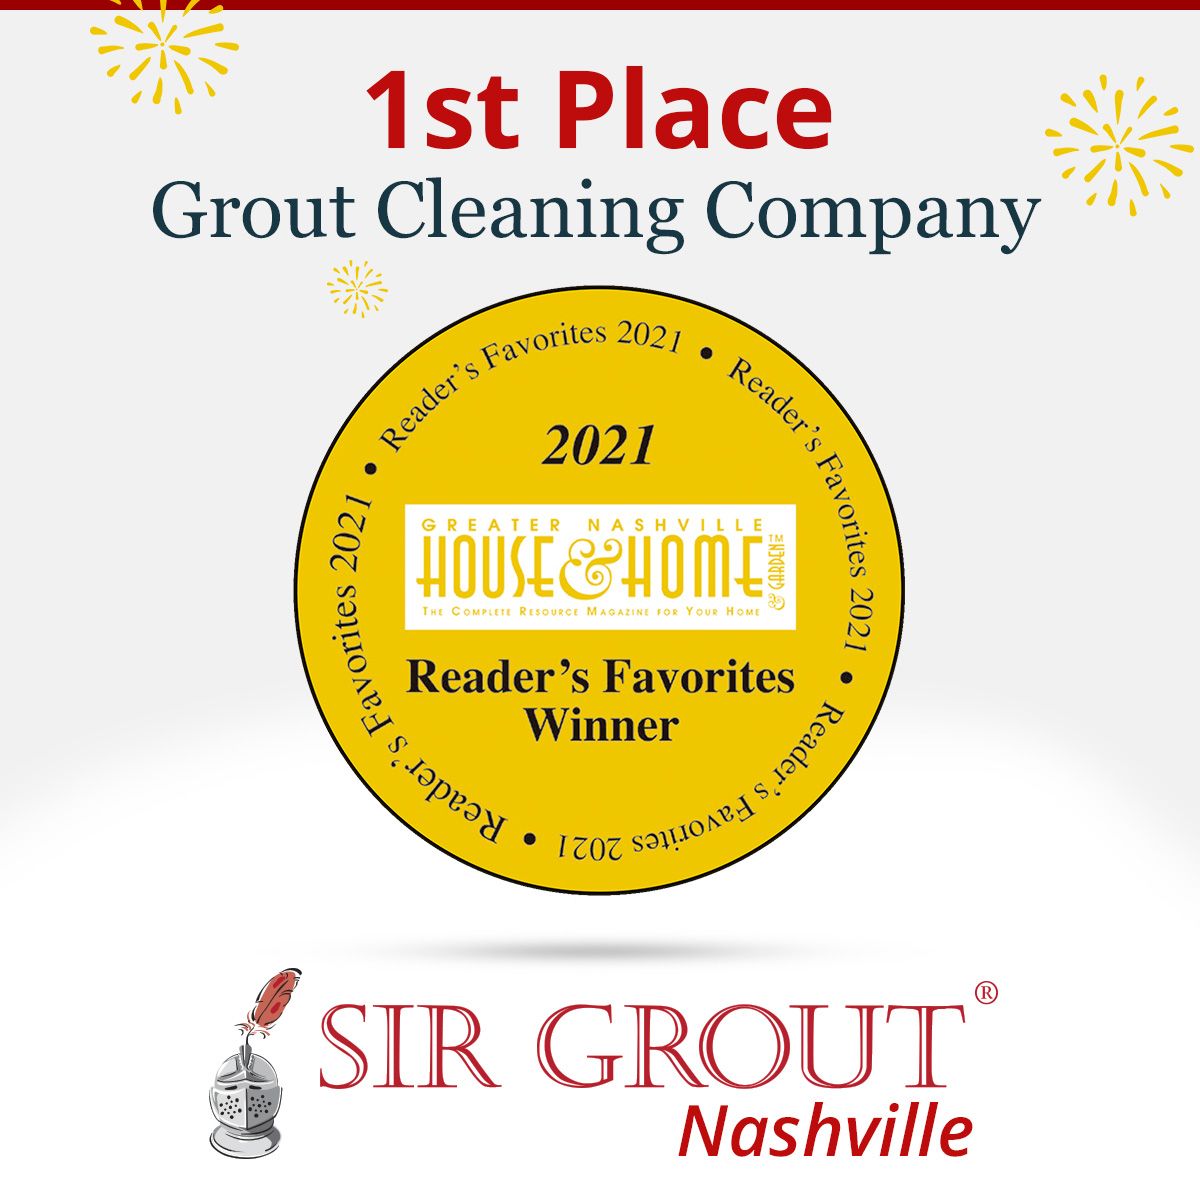 1st Place Grout Cleaning Company